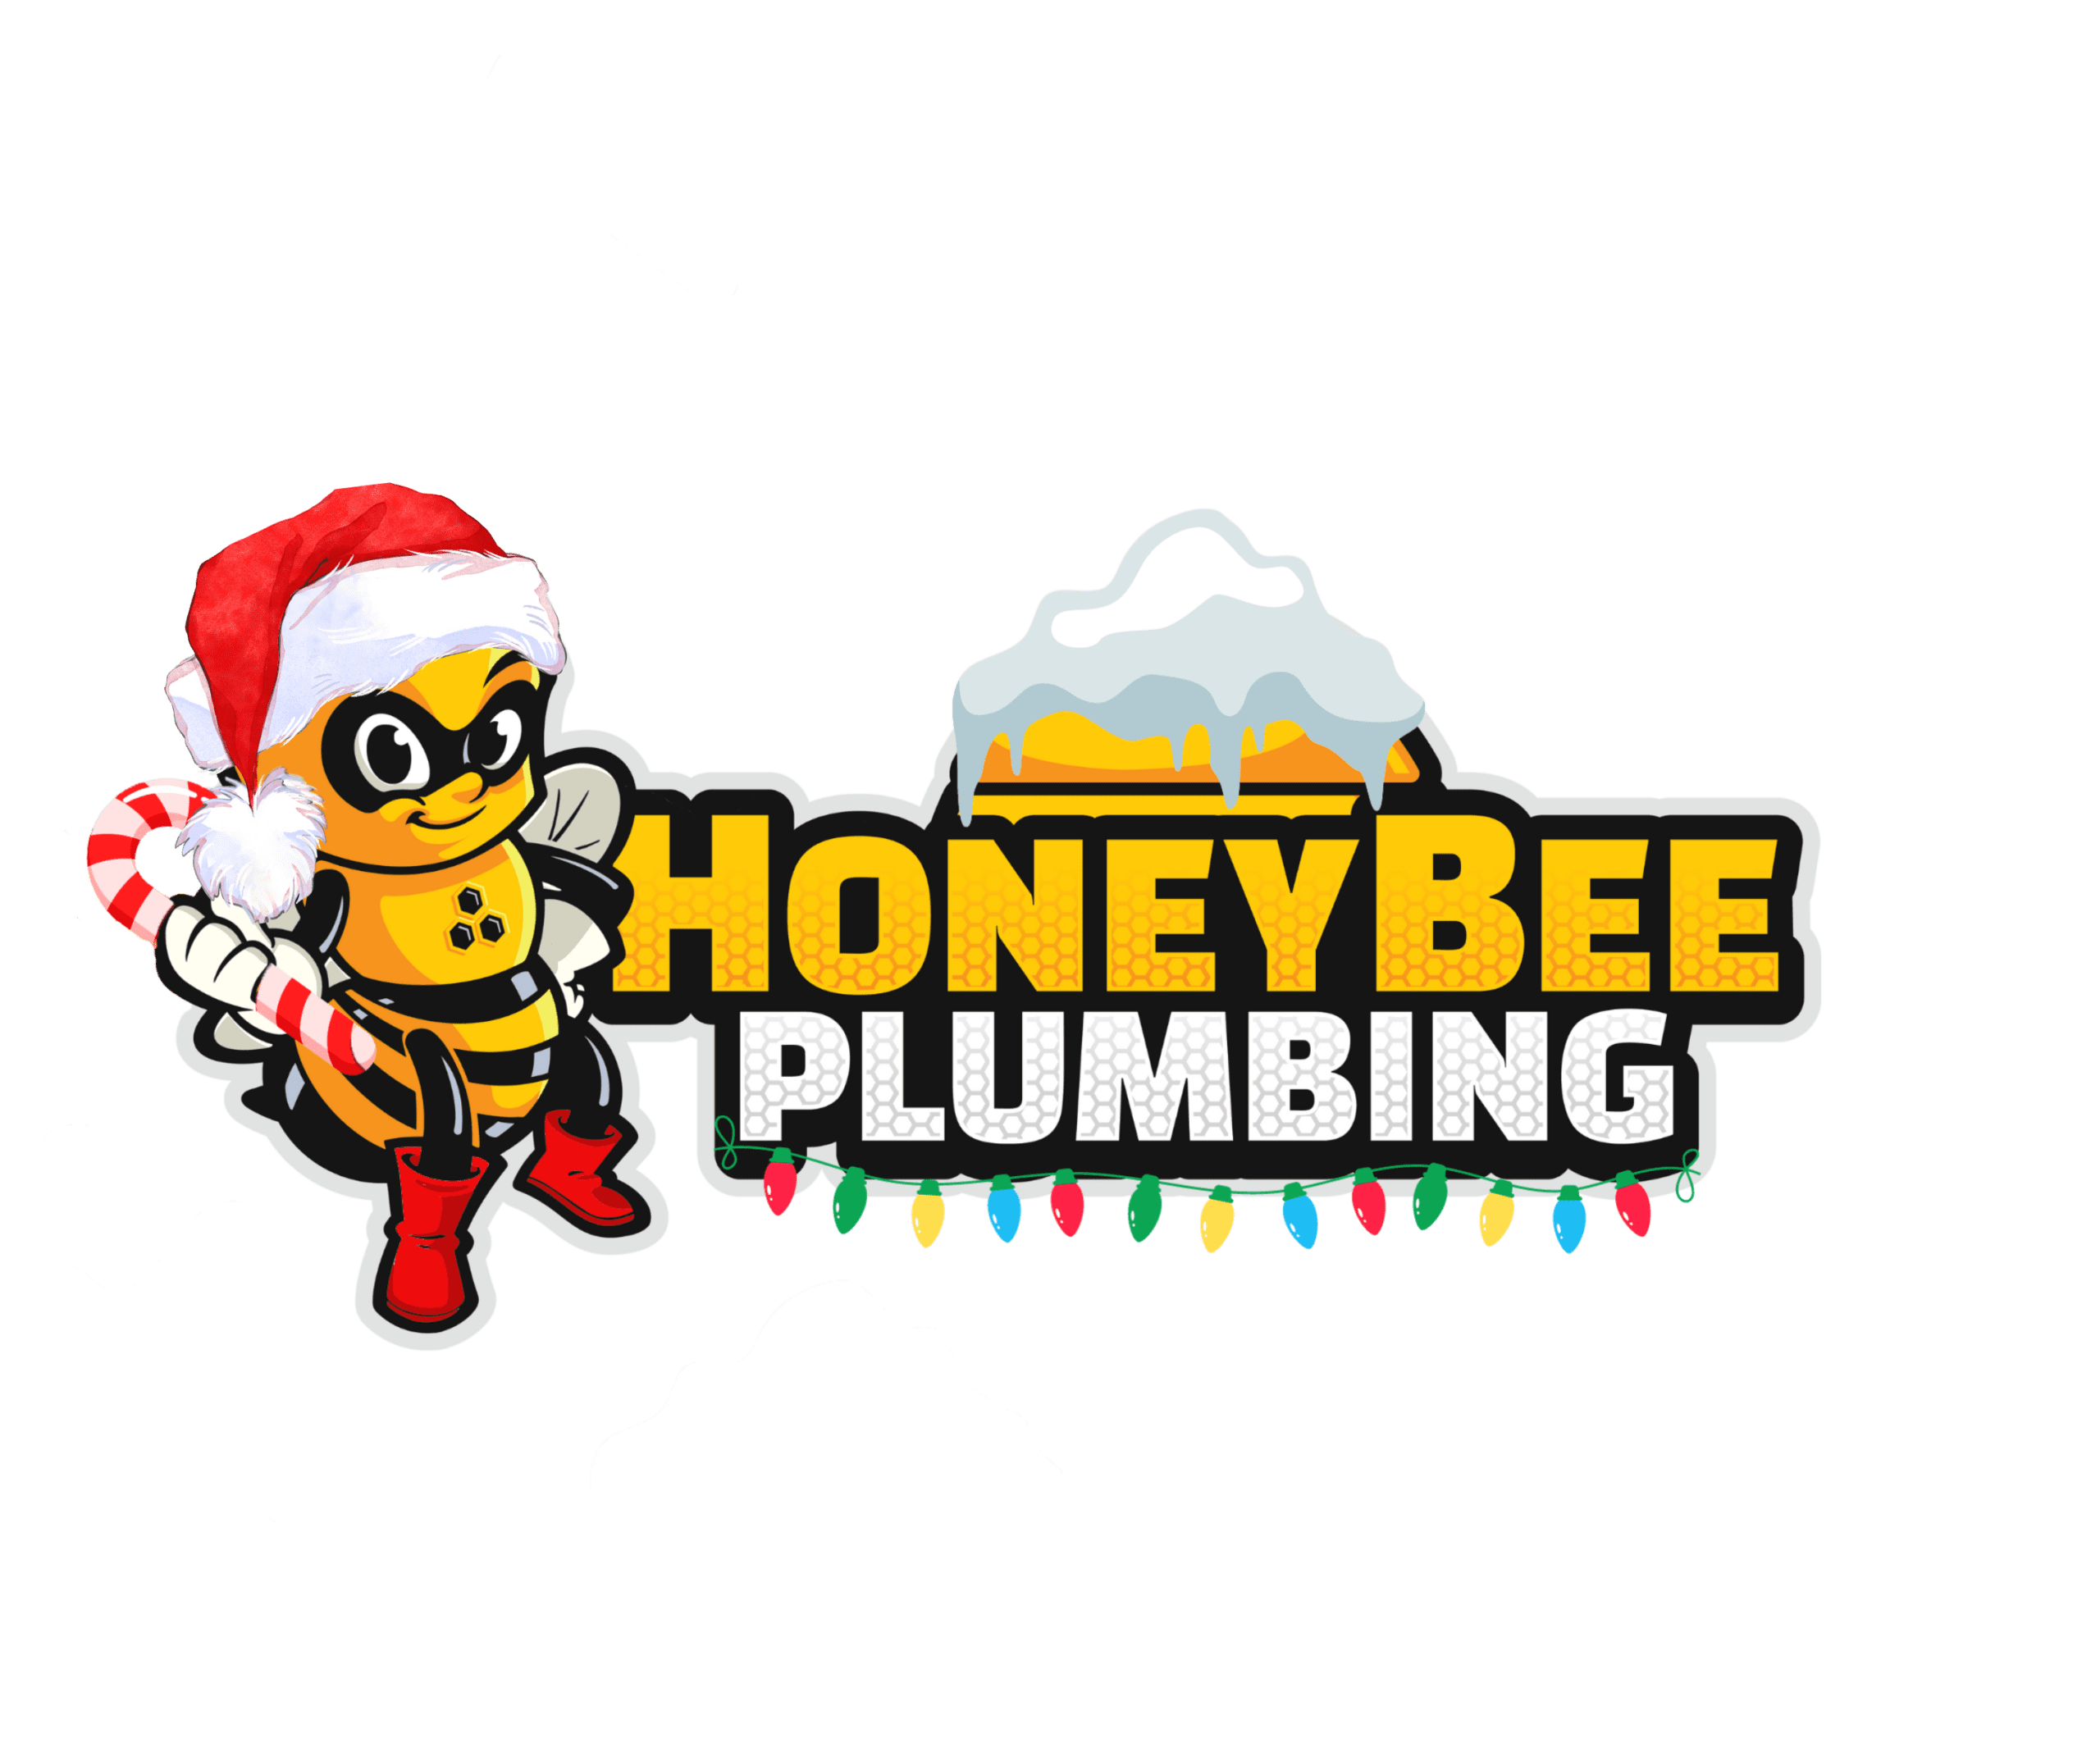 Honey Bee Plumbing logo featuring a bee mascot wearing a Santa hat and red boots, holding a candy cane, with a snow cap on the logo and Christmas lights strung around.